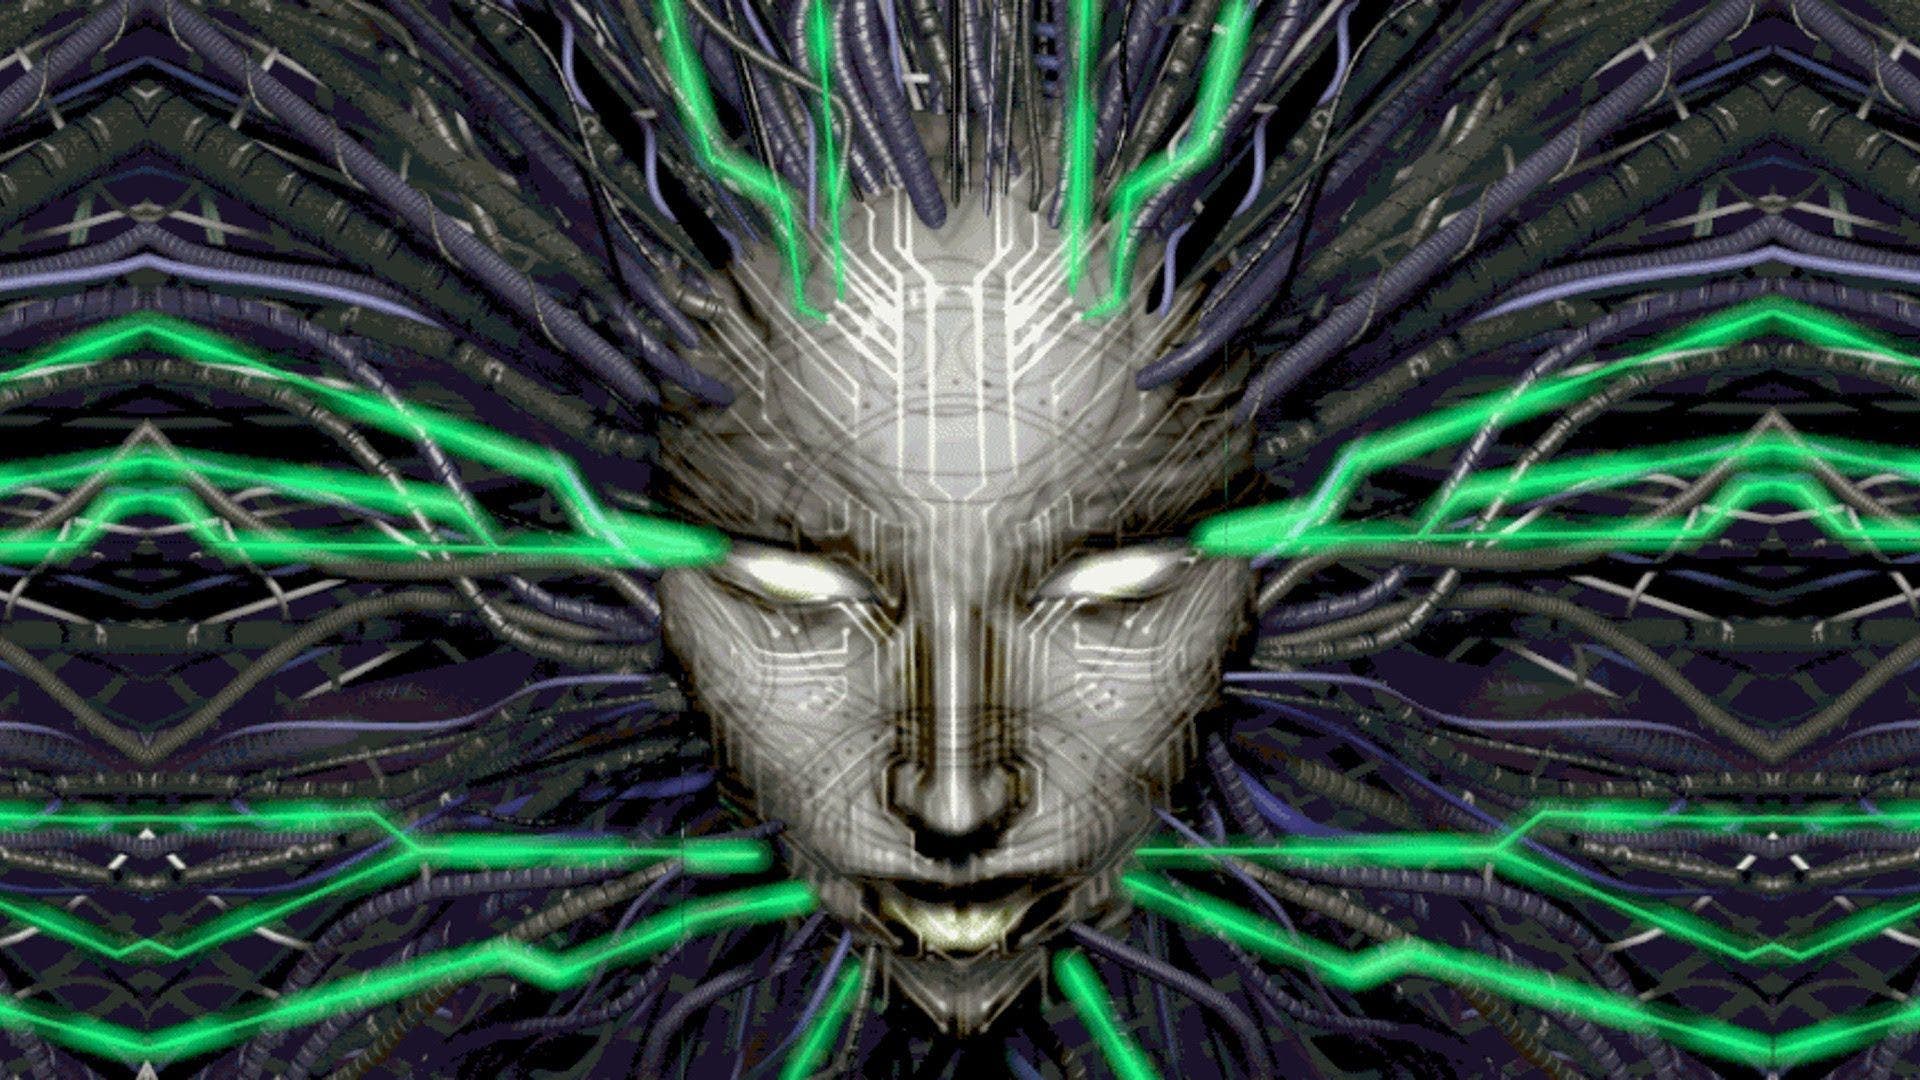 system shock 1 save game